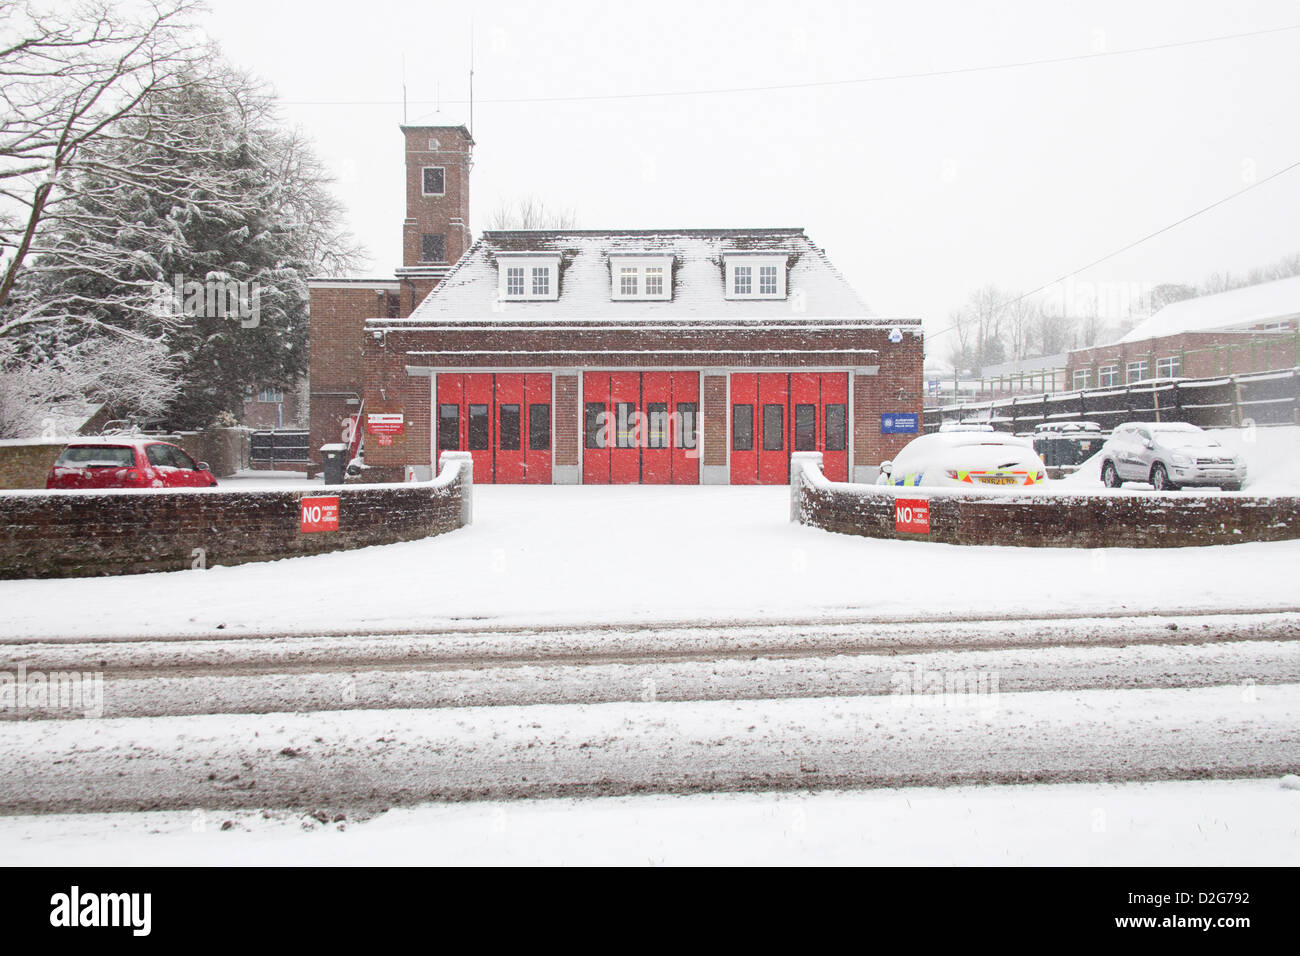 The Fire Station  in Alresford covered in snow, Hampshire, England, United Kingdom, Stock Photo